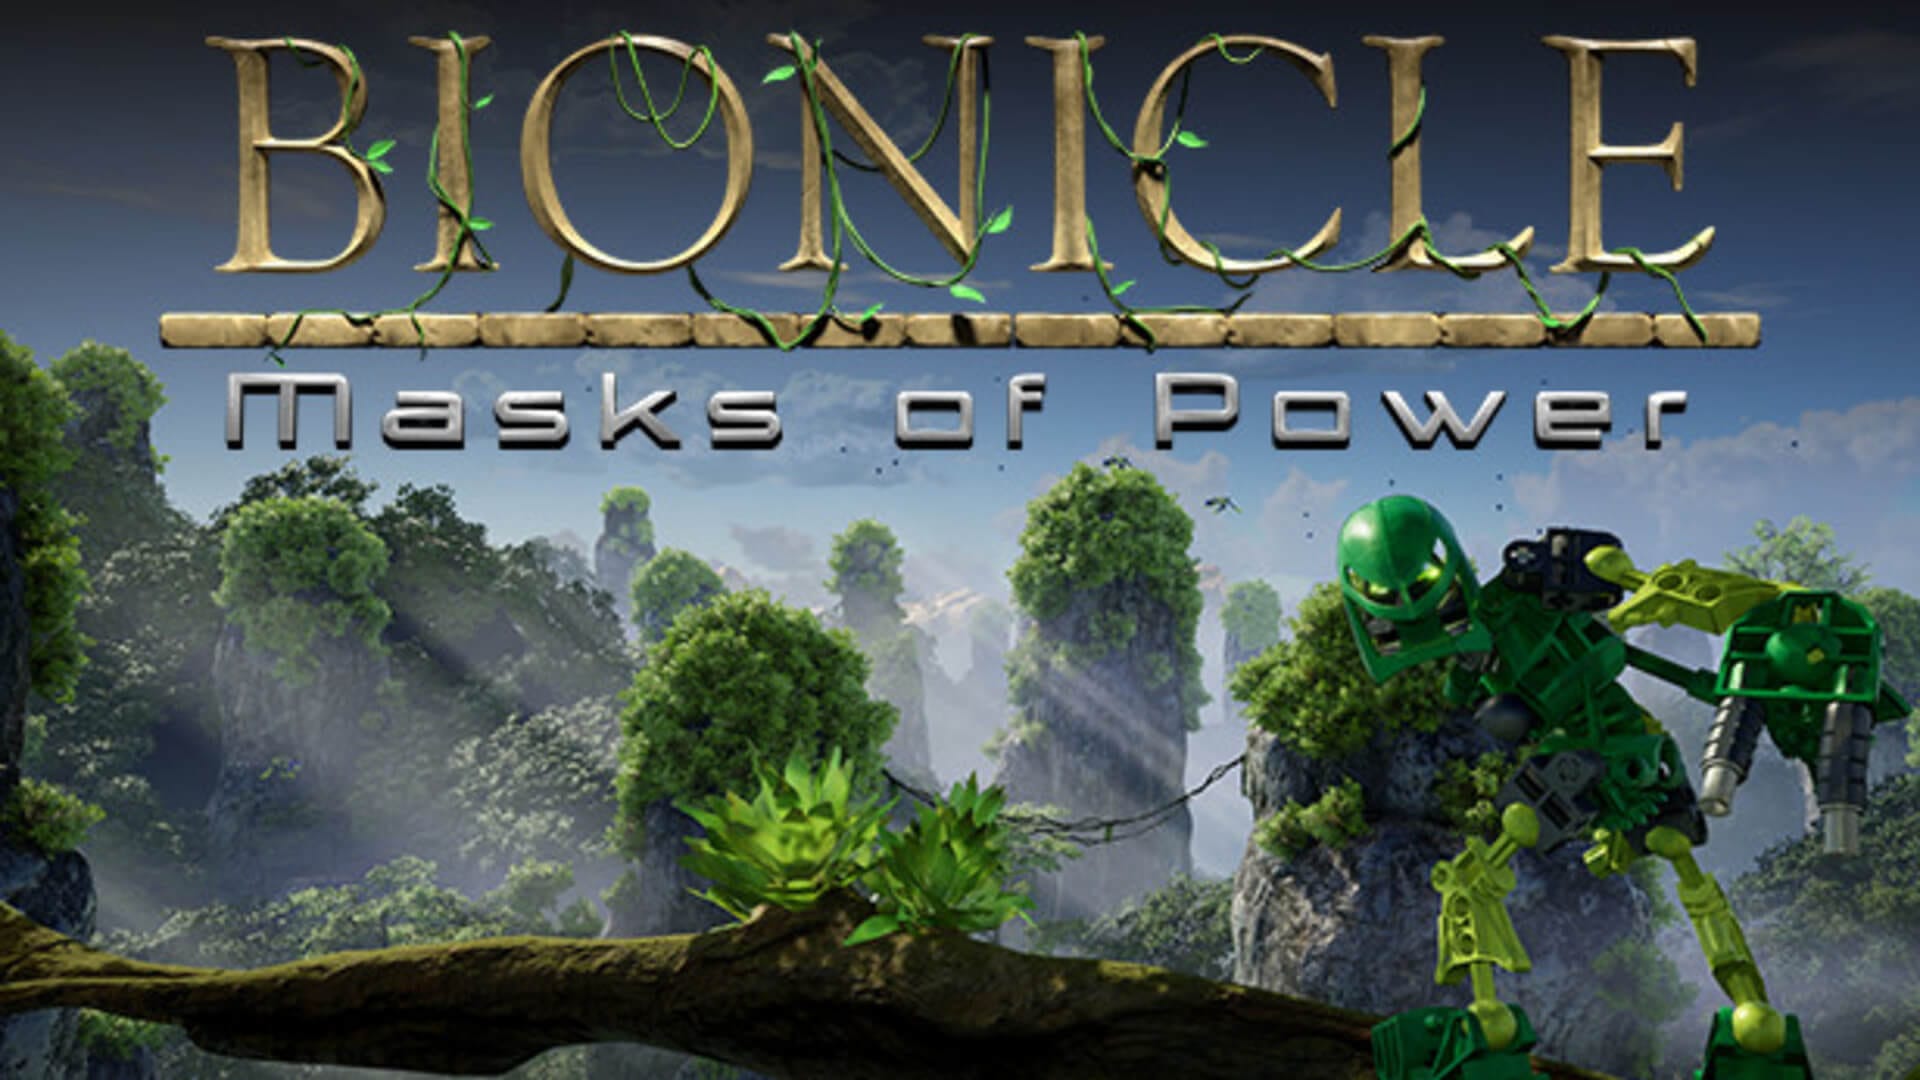 Promotional art for BIONICLE Masks of Power